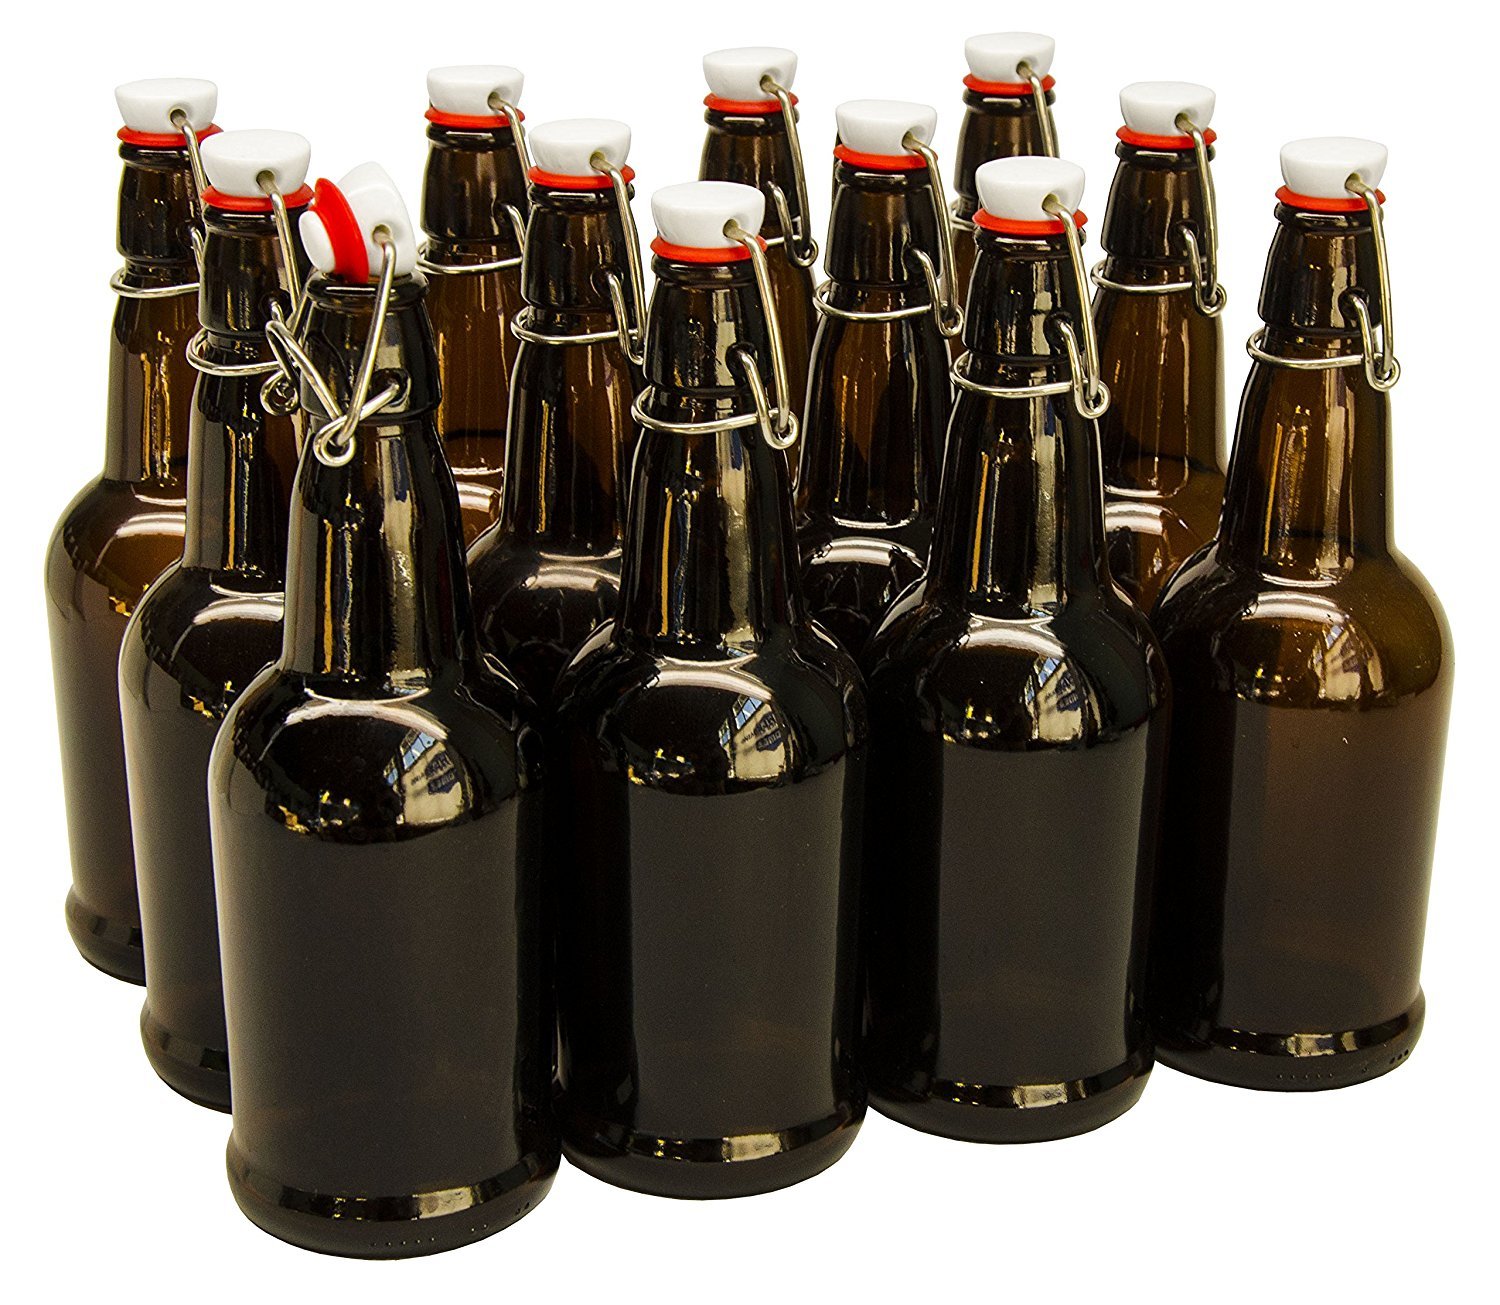 Grosch Beer Bottles For Home Brewing Our Top 5 3324